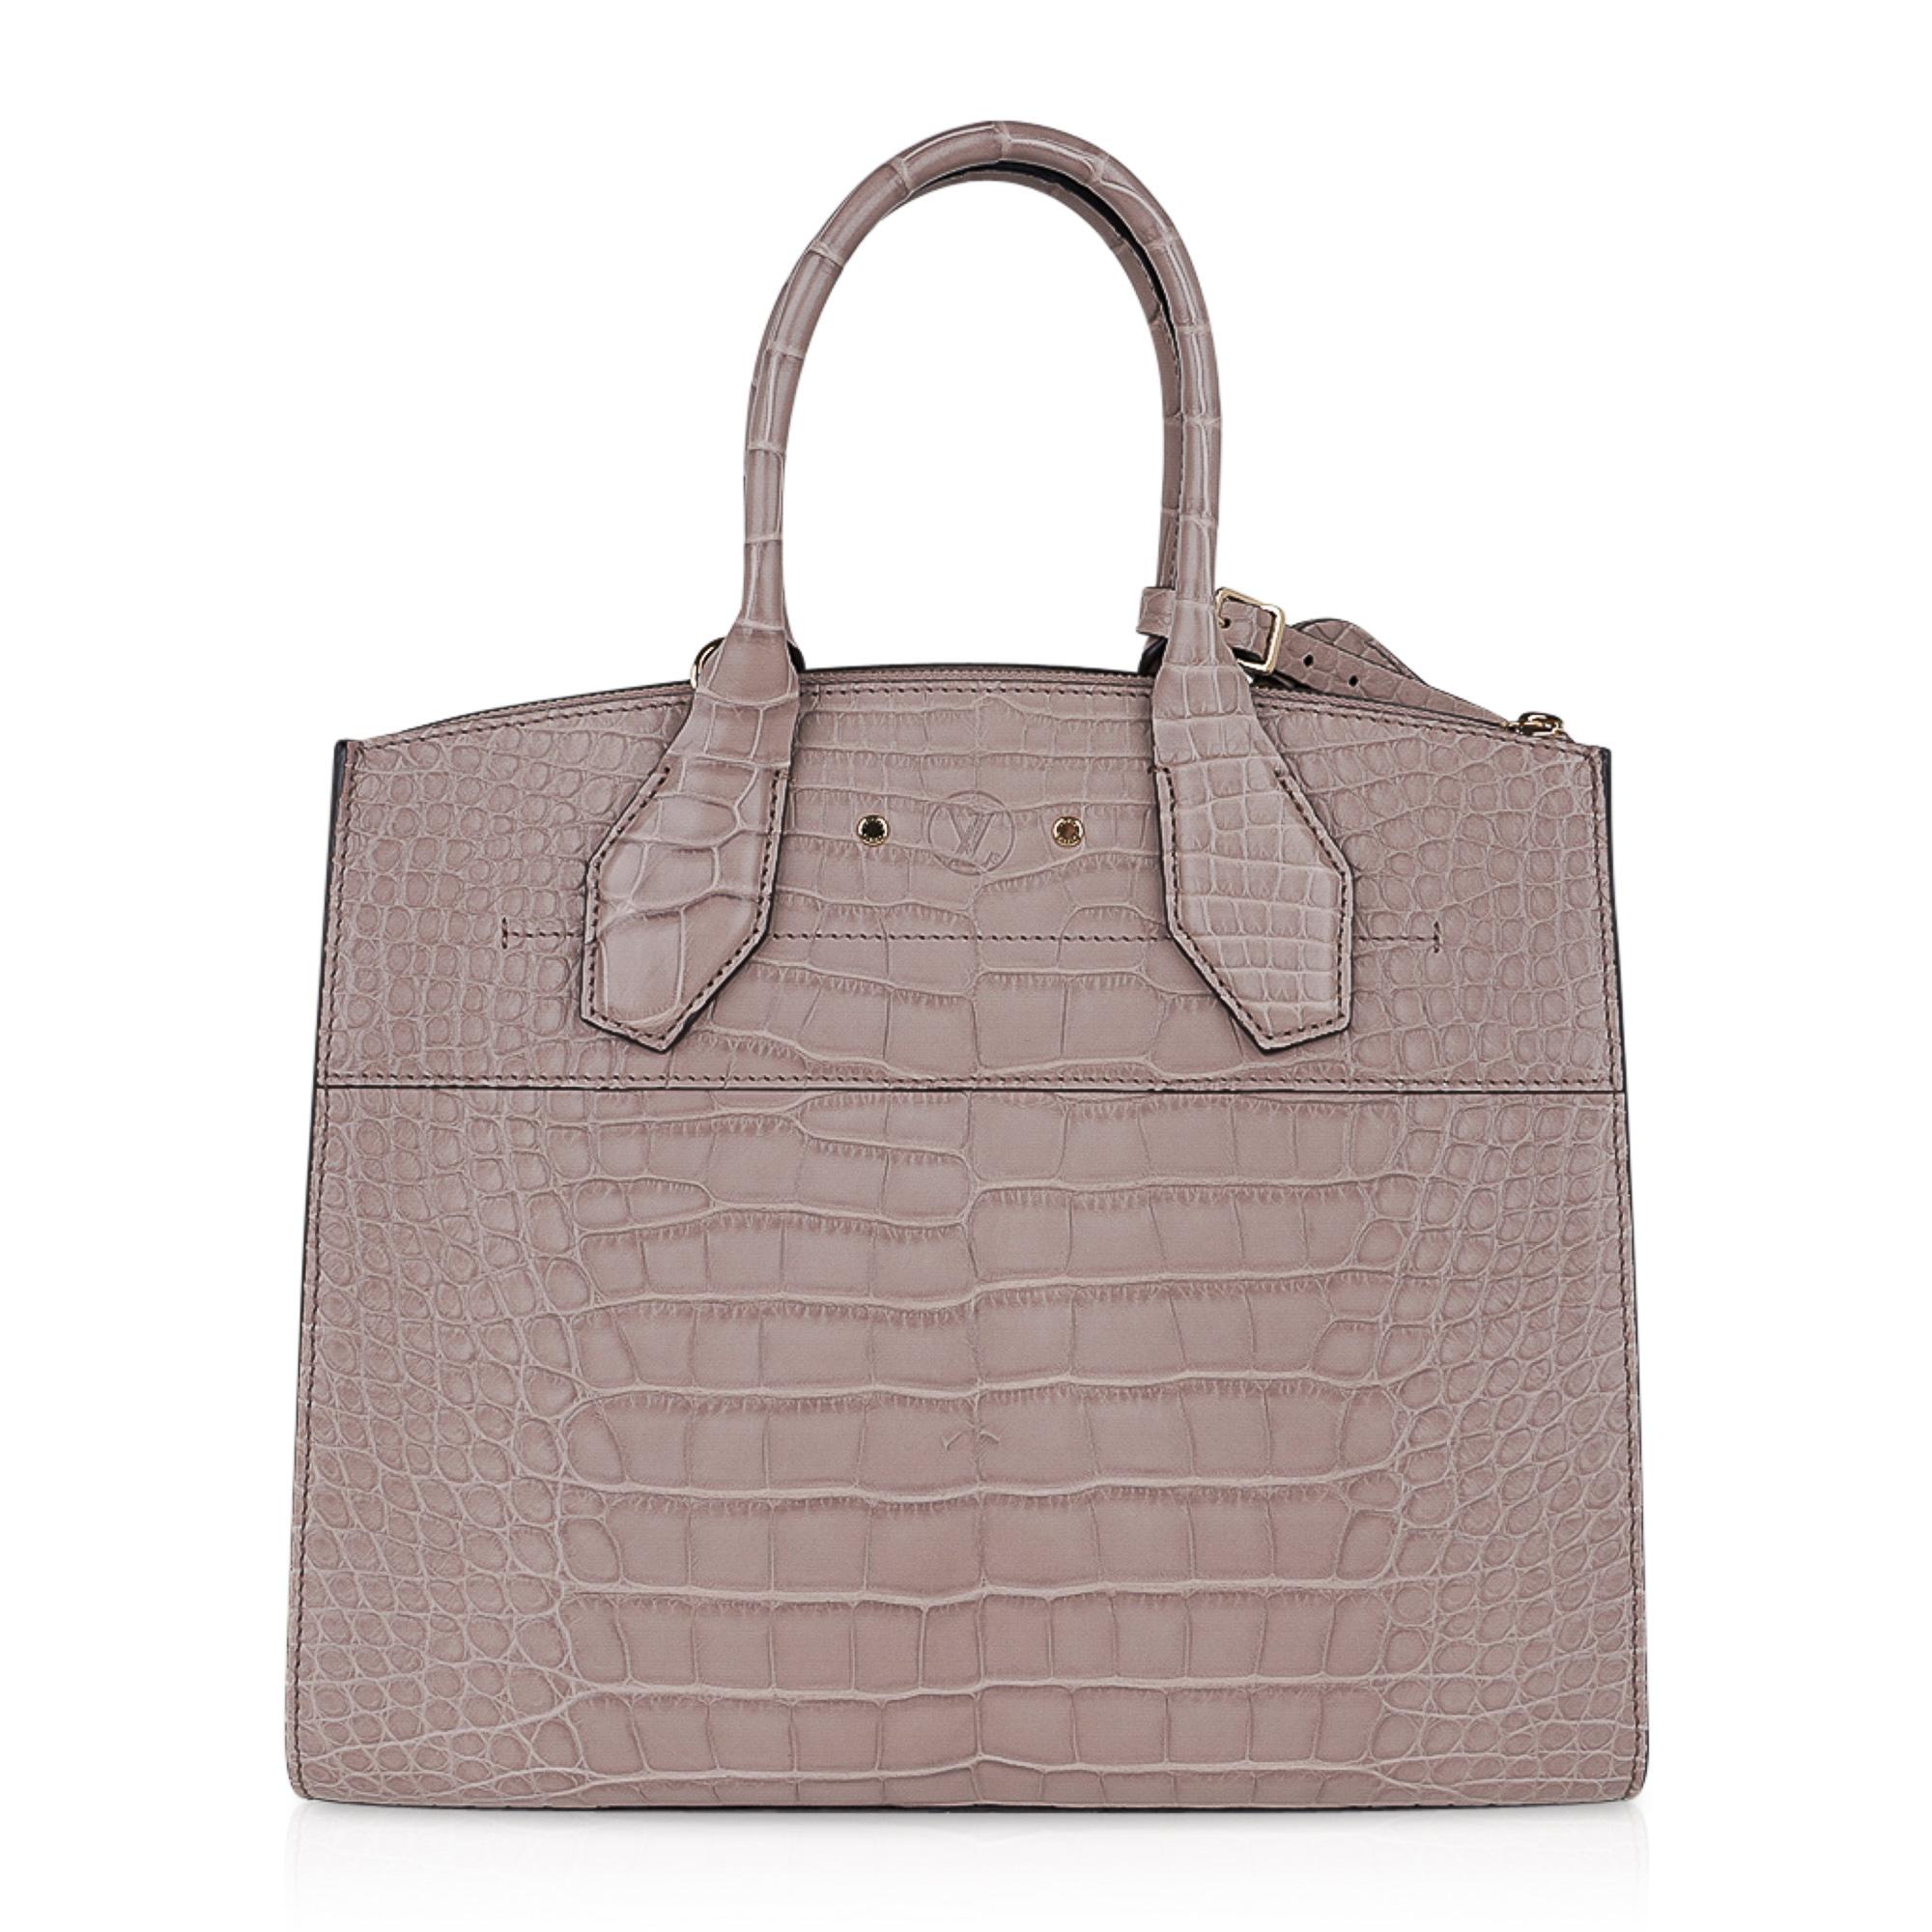 Louis Vuitton City Steamer Bag Taupe Matte Crocodile Limited Edition  In New Condition For Sale In Miami, FL